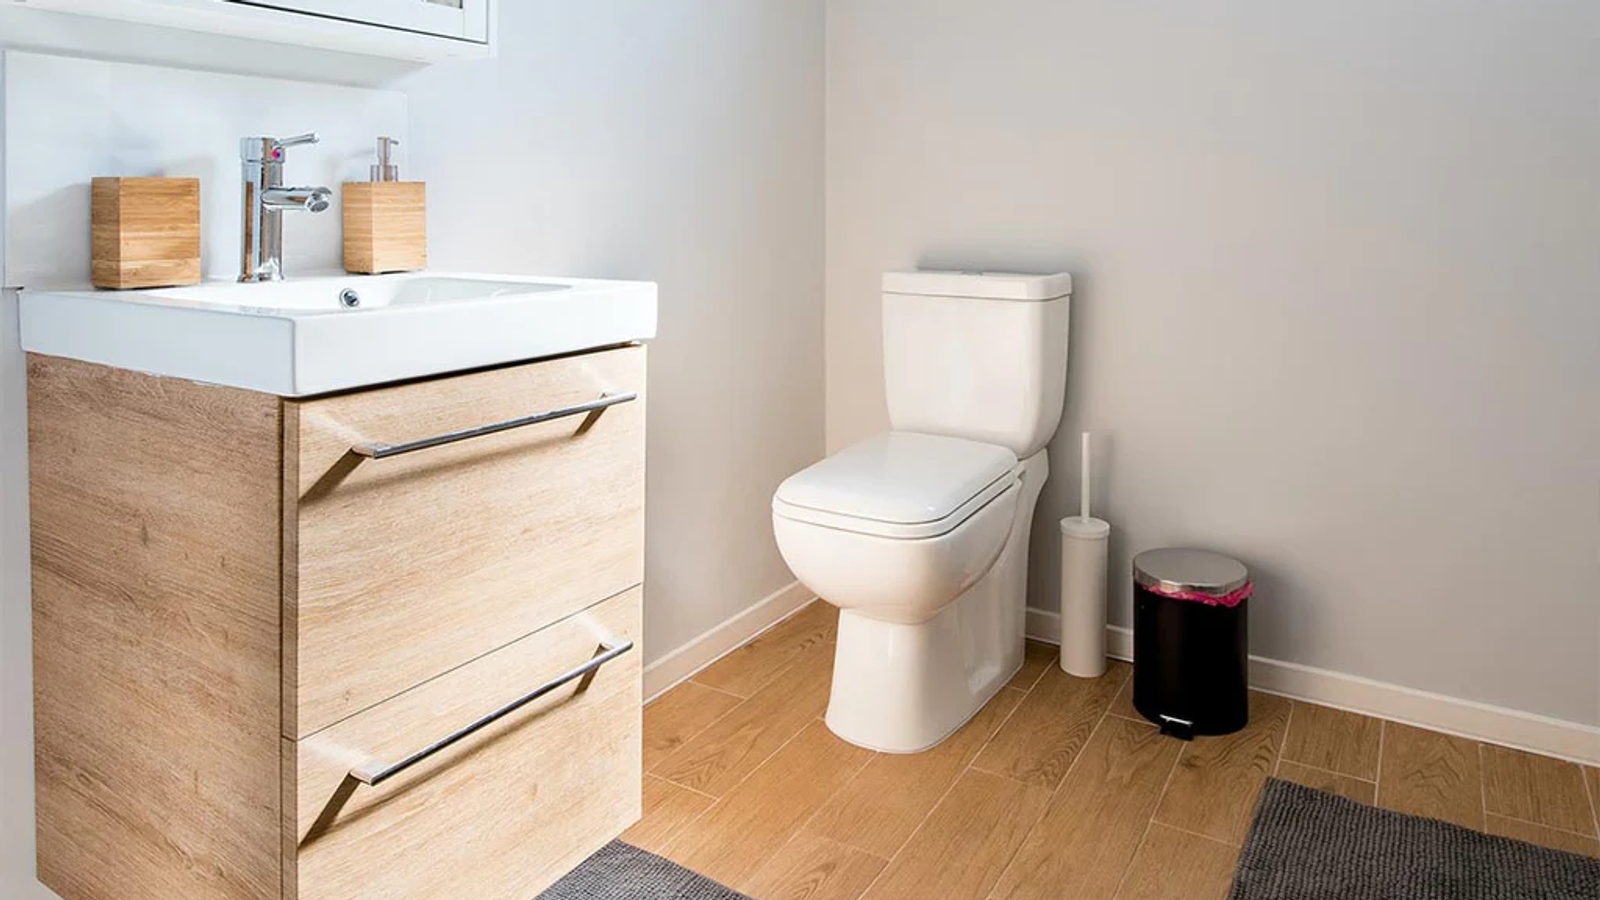 A bathroom with wooden drawers and white sink and a white toilet